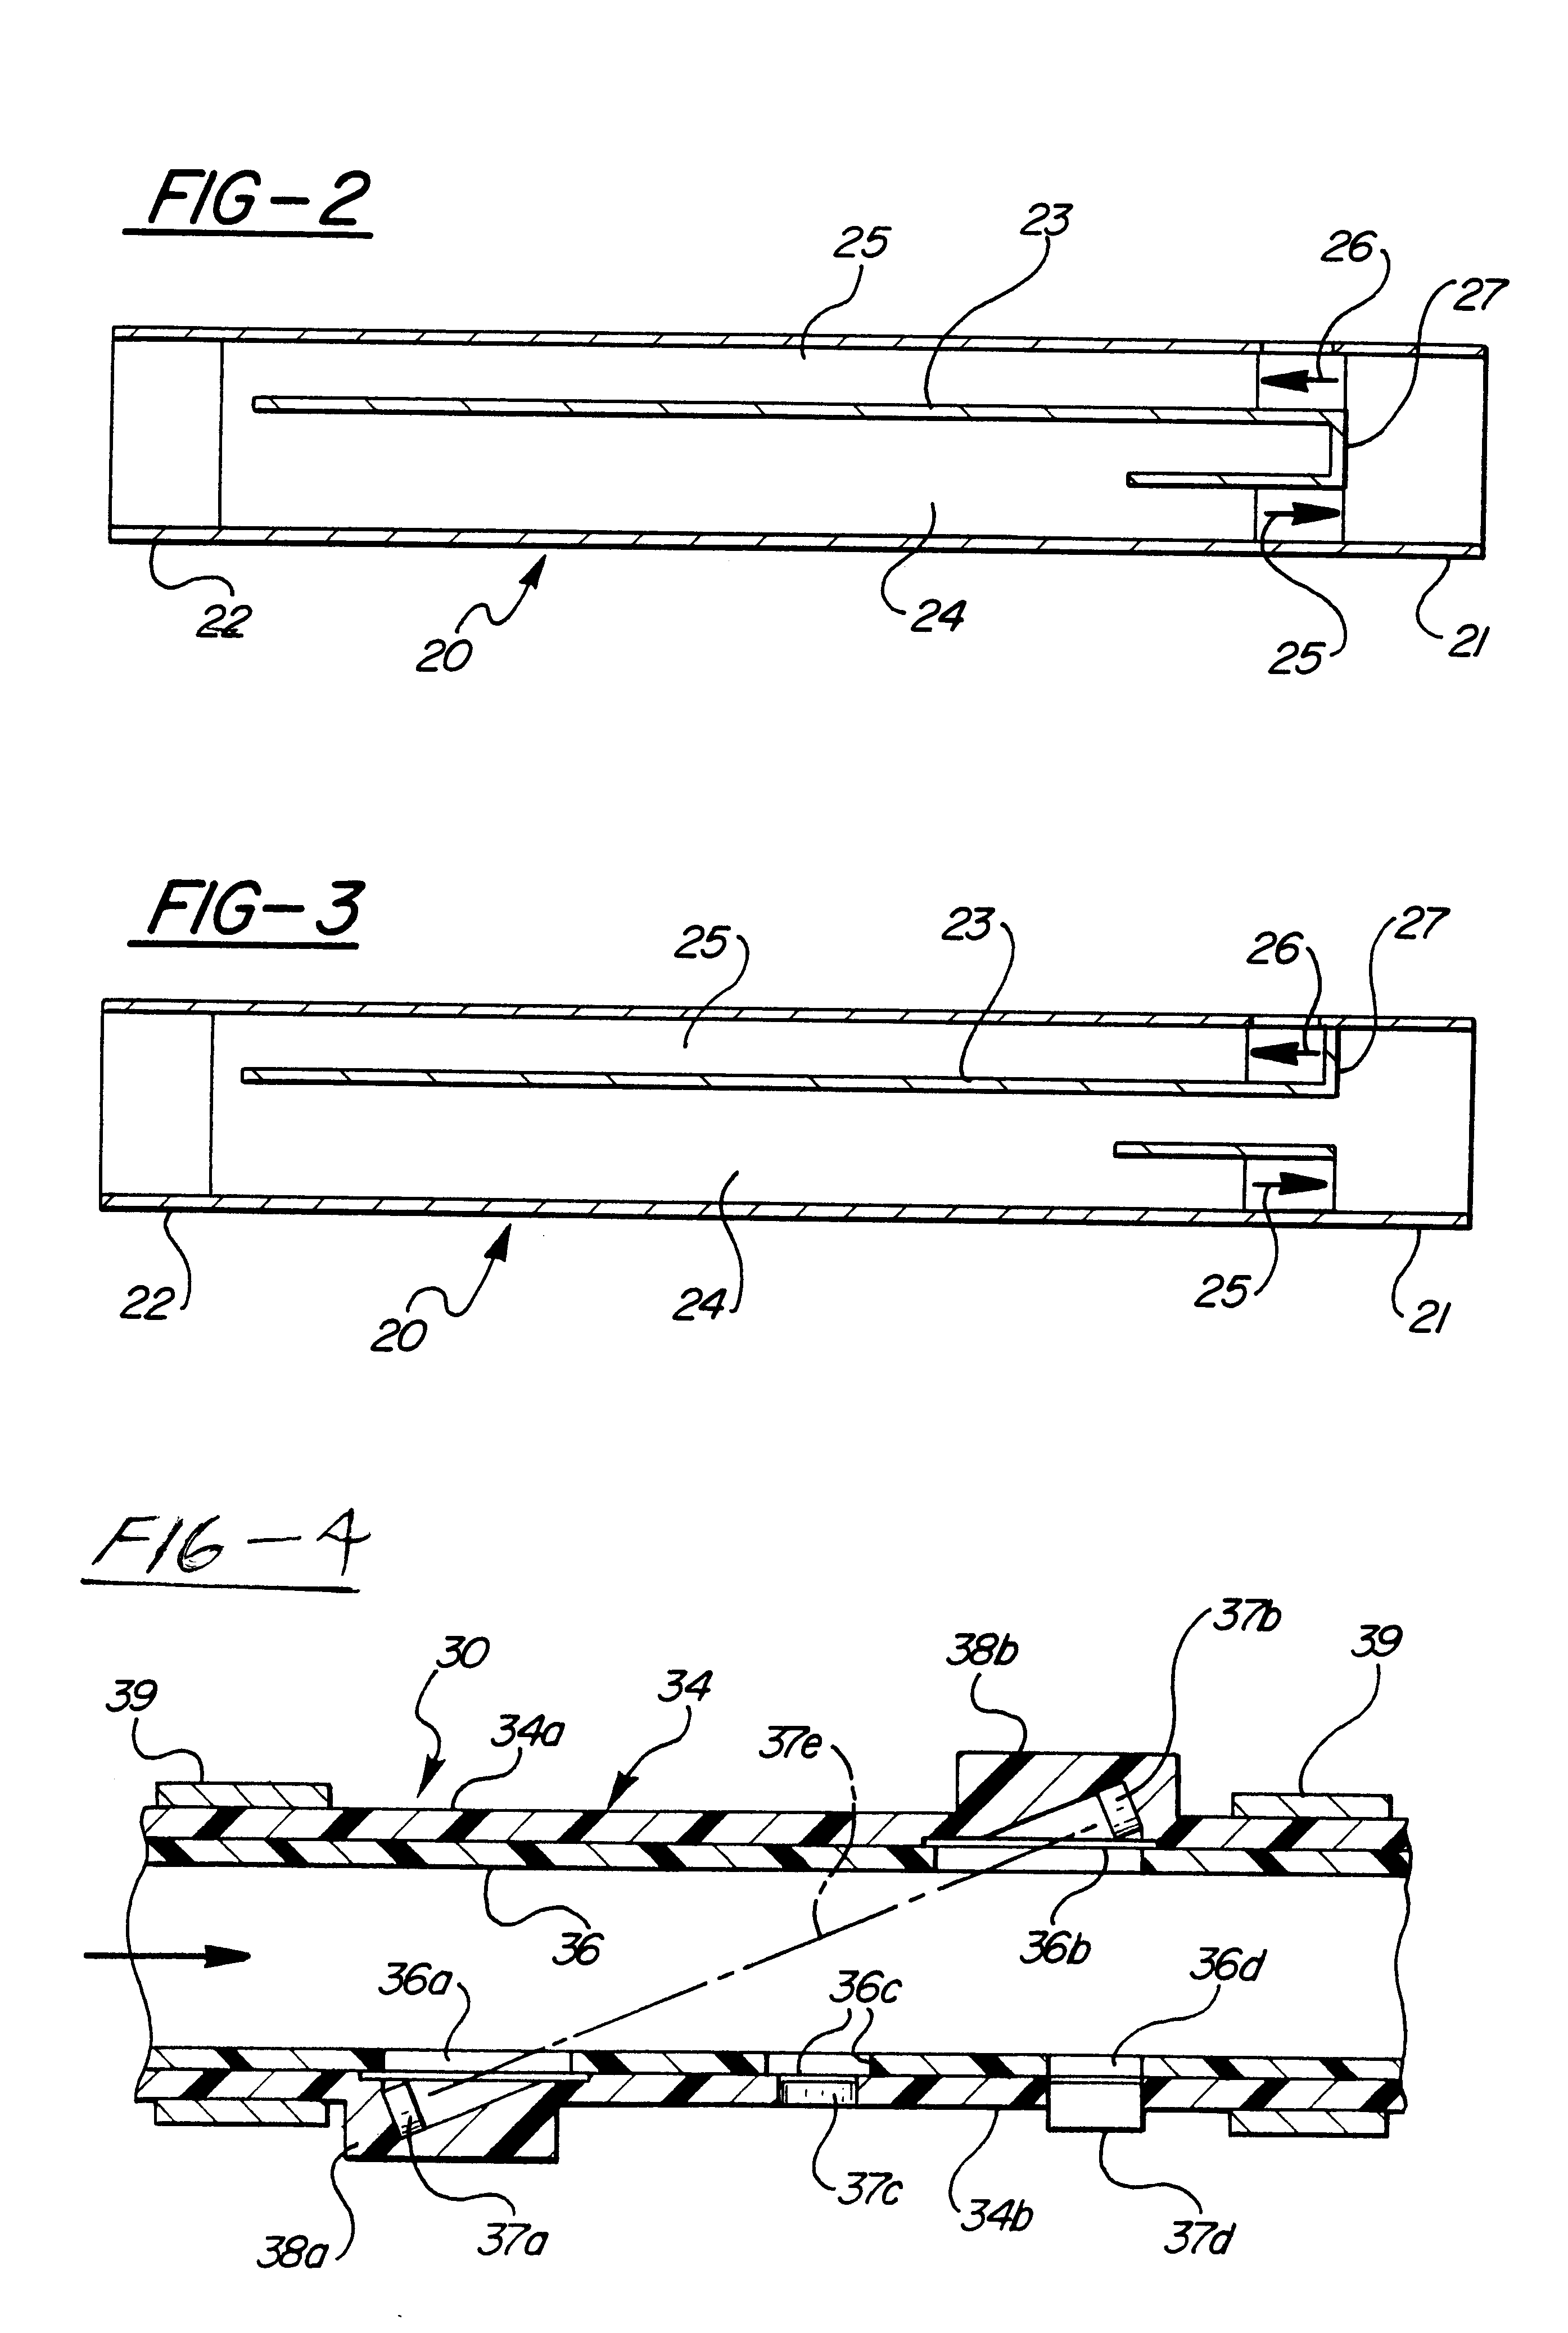 Method and apparatus for the non-invasive determination of cardiac output